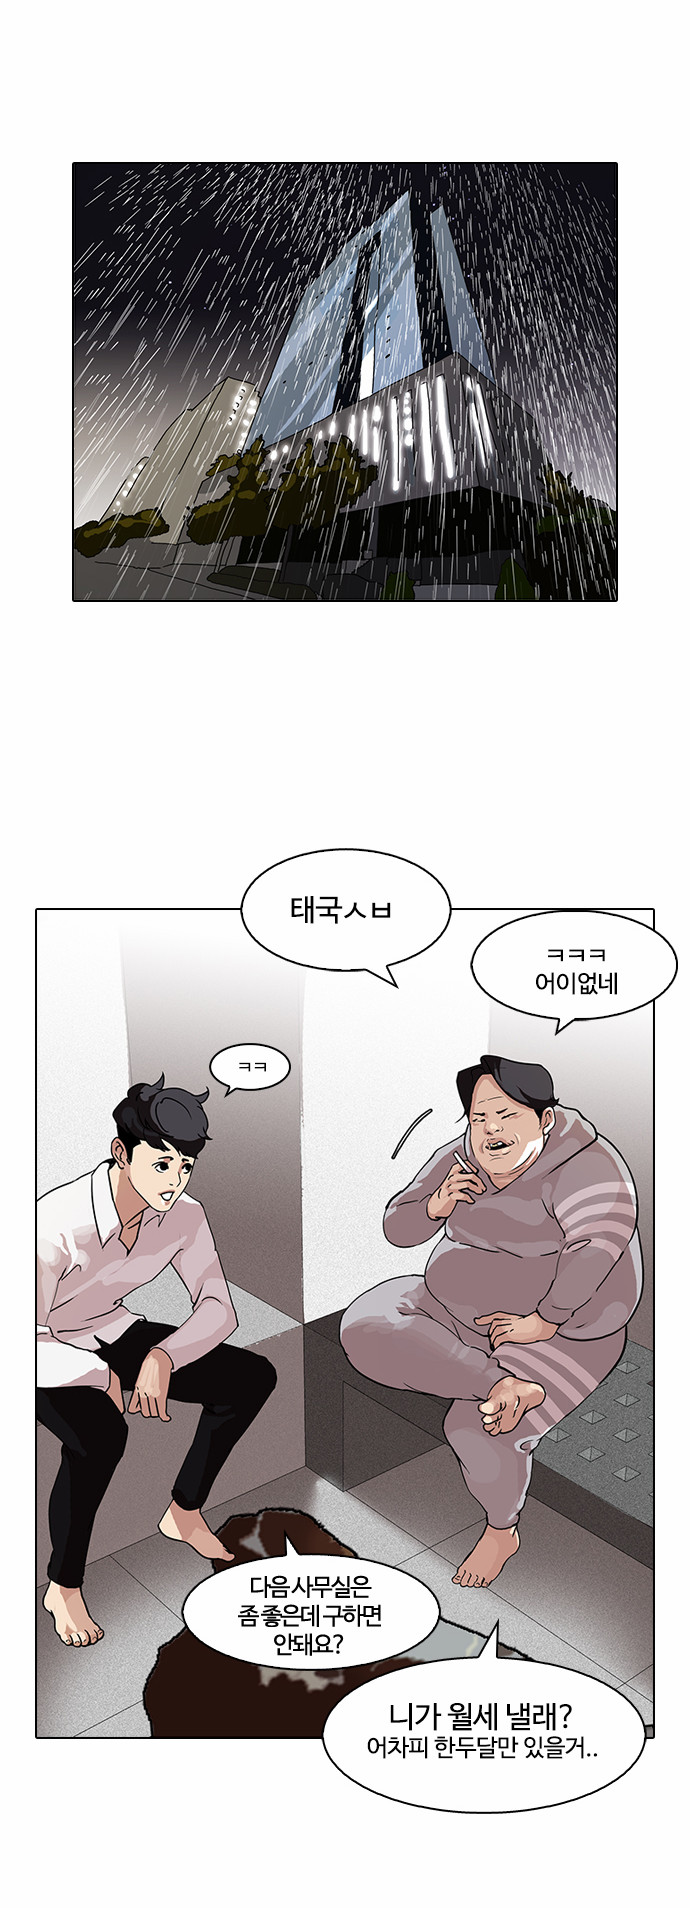 Lookism - Chapter 87 - Page 8